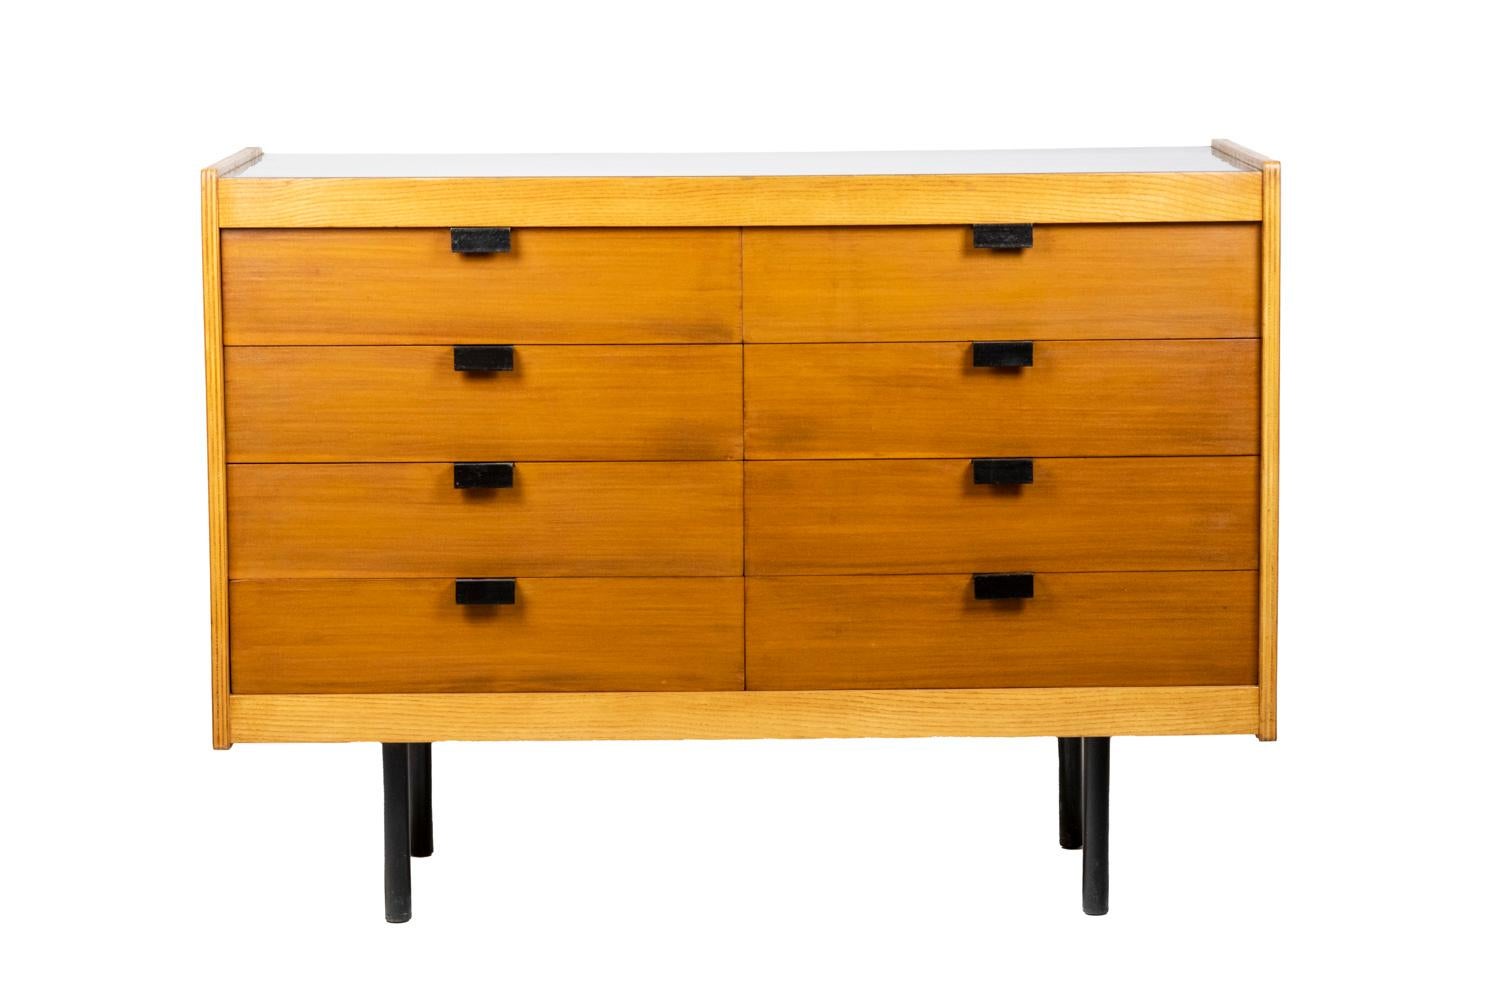 Alain Richard, attributed to. 
Charron Groupe 4, edited by. 

Chest of drawers in ash and mahogany opening with eight drawers in front. Tray in black color. Base and rectangular handles in black lacquered metal.

French work realized in 1954.